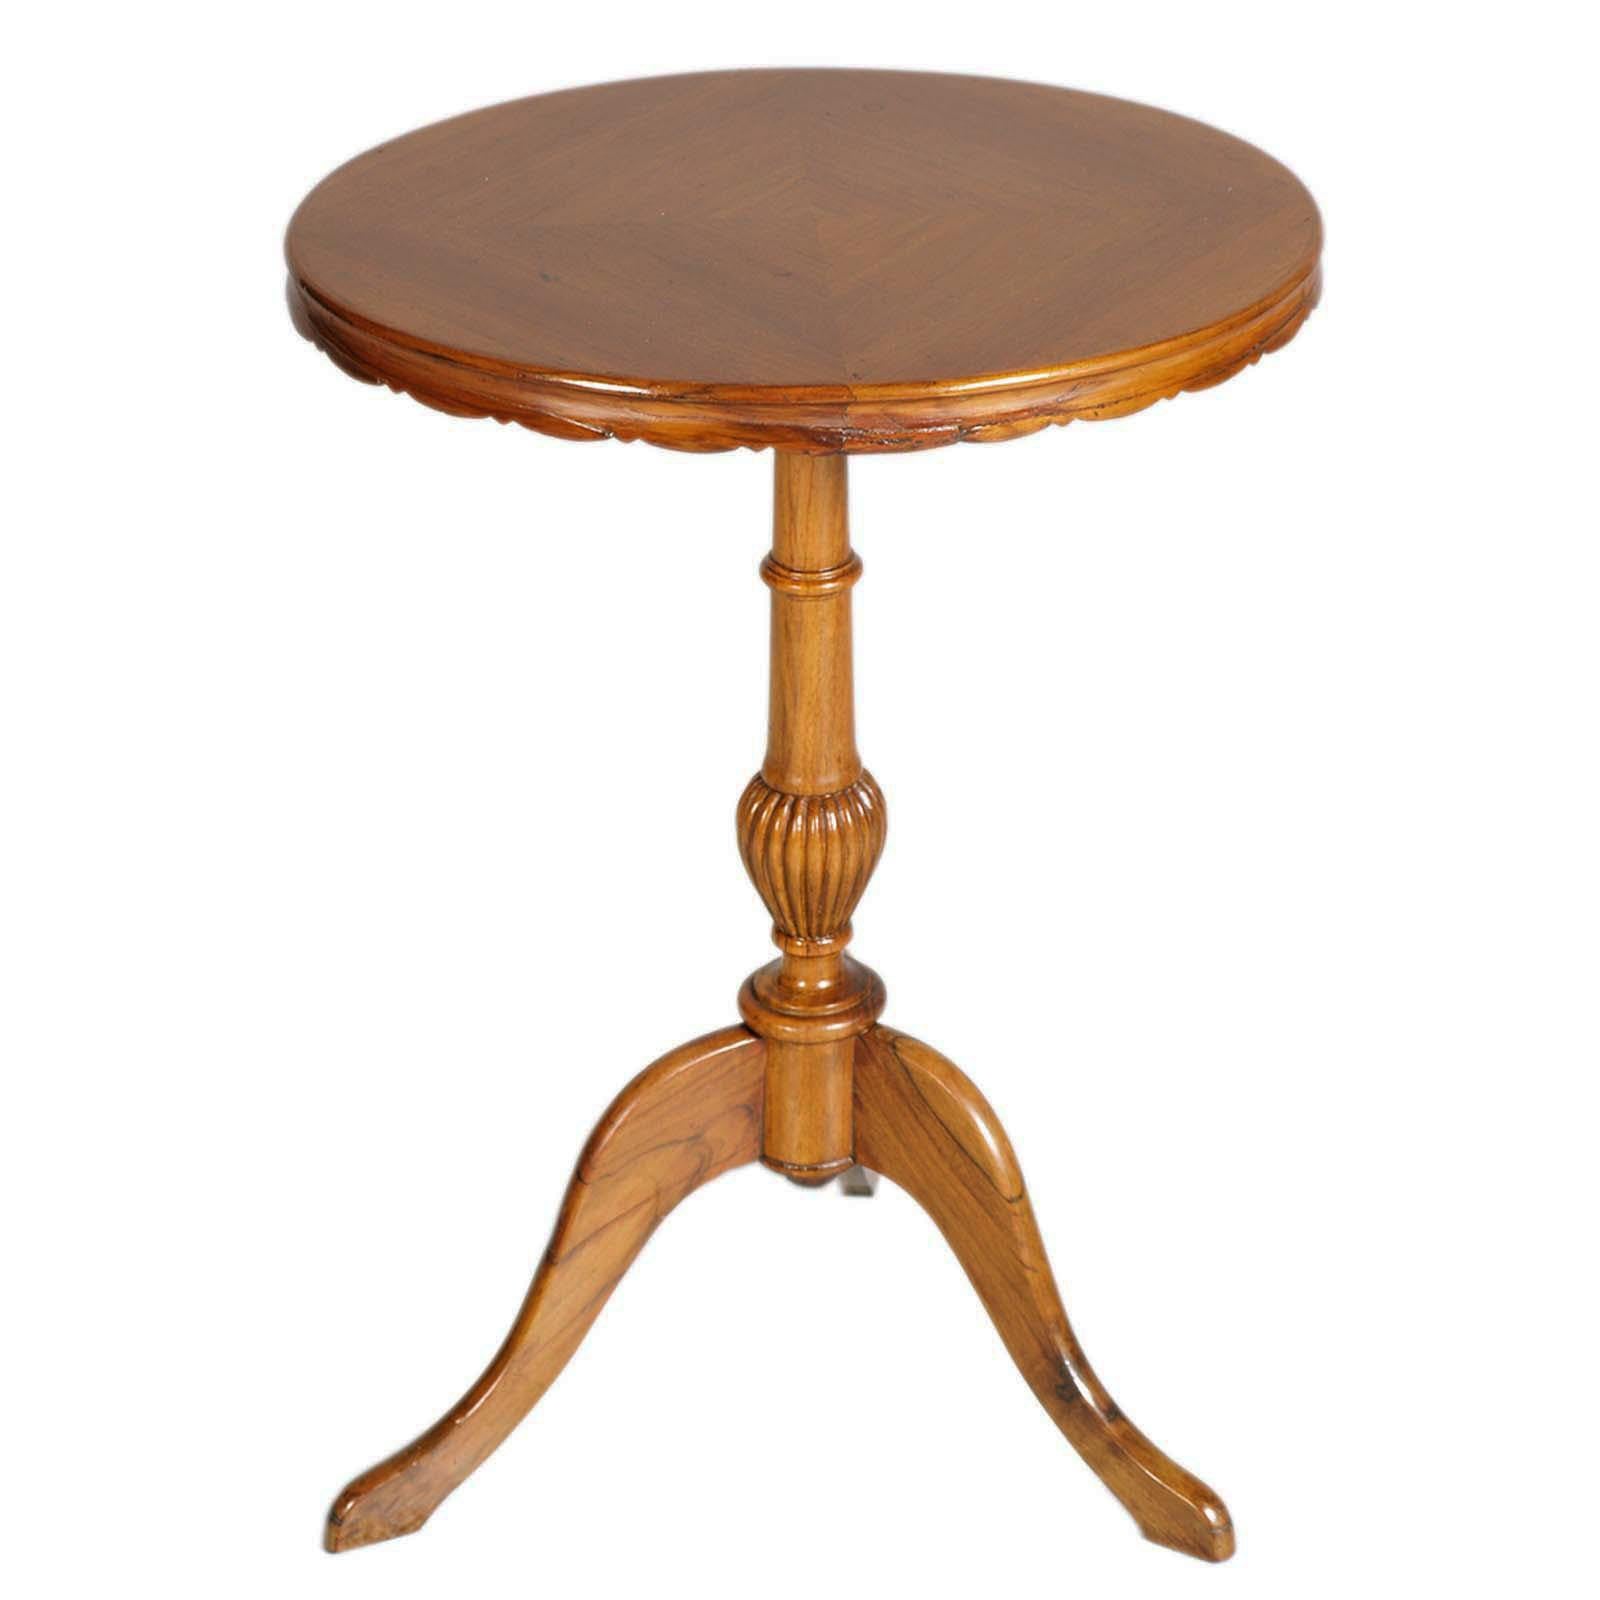 Elegant small tripod table, oval in shape, skilfully worked by the famous cabinetmaker of Bassano del Grappa for the demanding Italian bourgeoisie of the period between the two world wars.
Its compact size made it useful for occasional use.

The